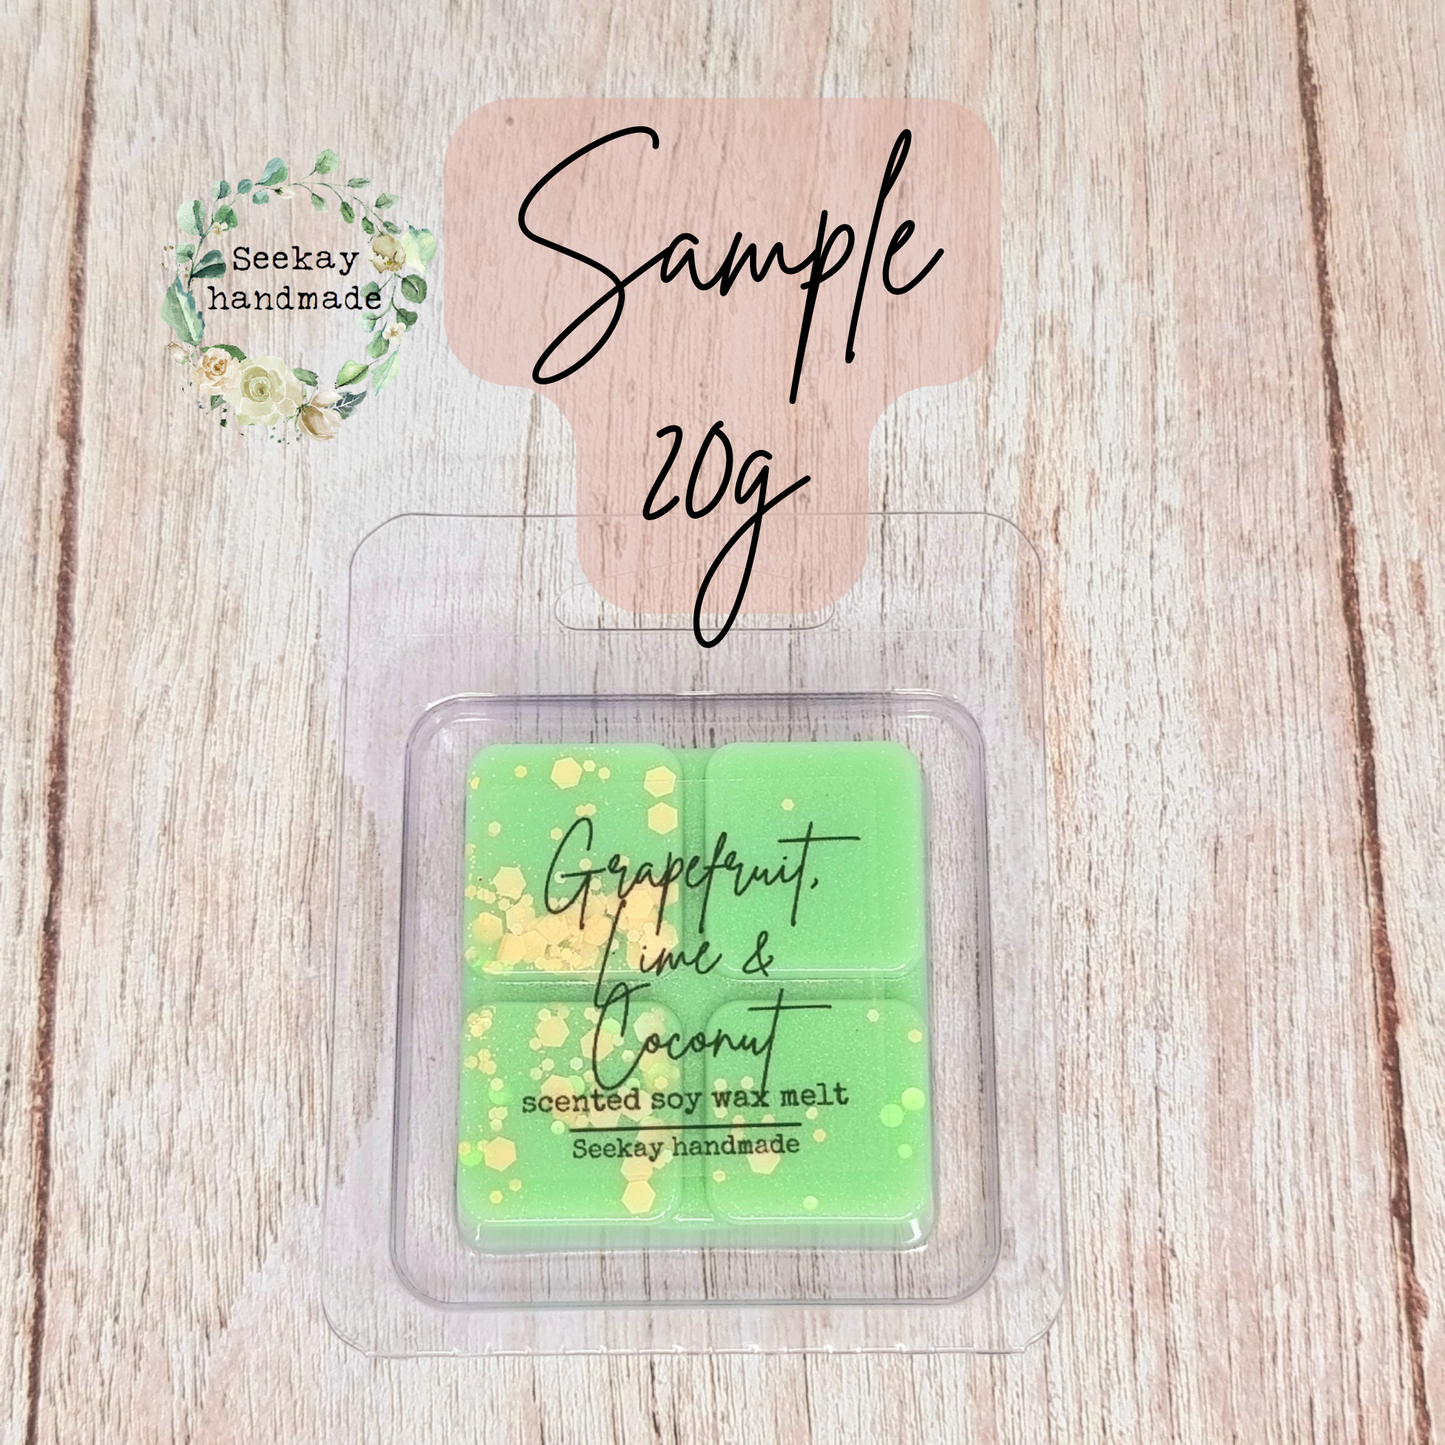 Grapefruit, Lime & Coconut scented soy wax melt